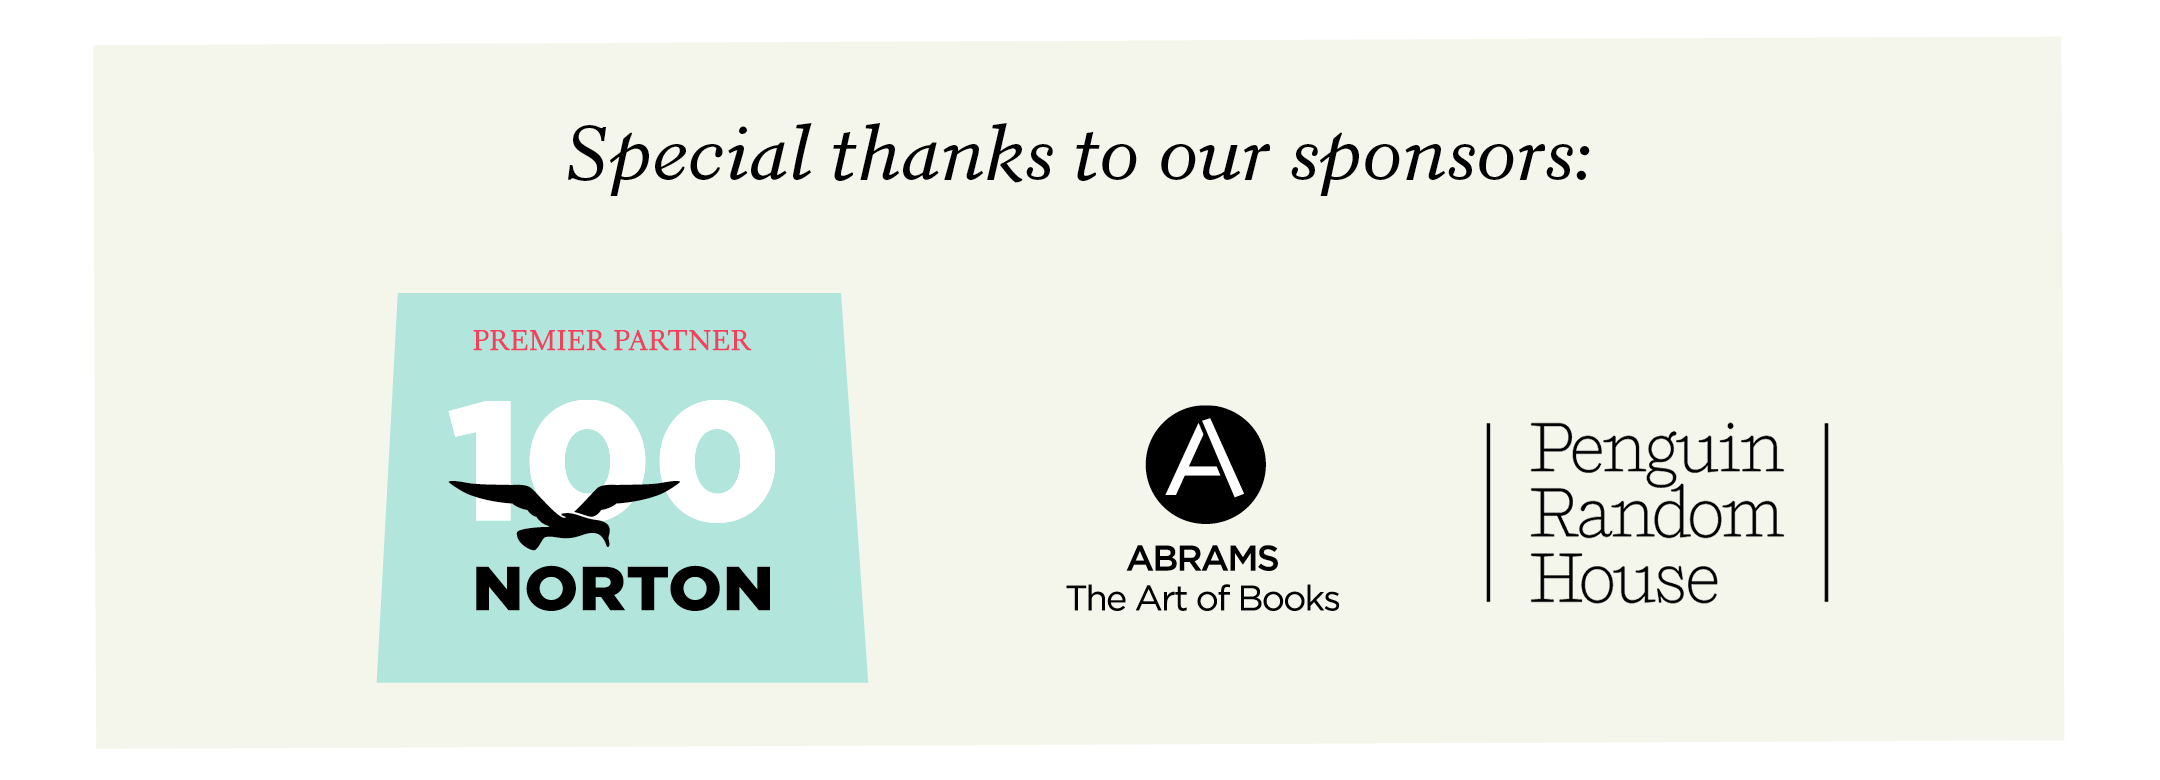 Special thanks to our sponsors Norton, Abrams, and Penguin Random House